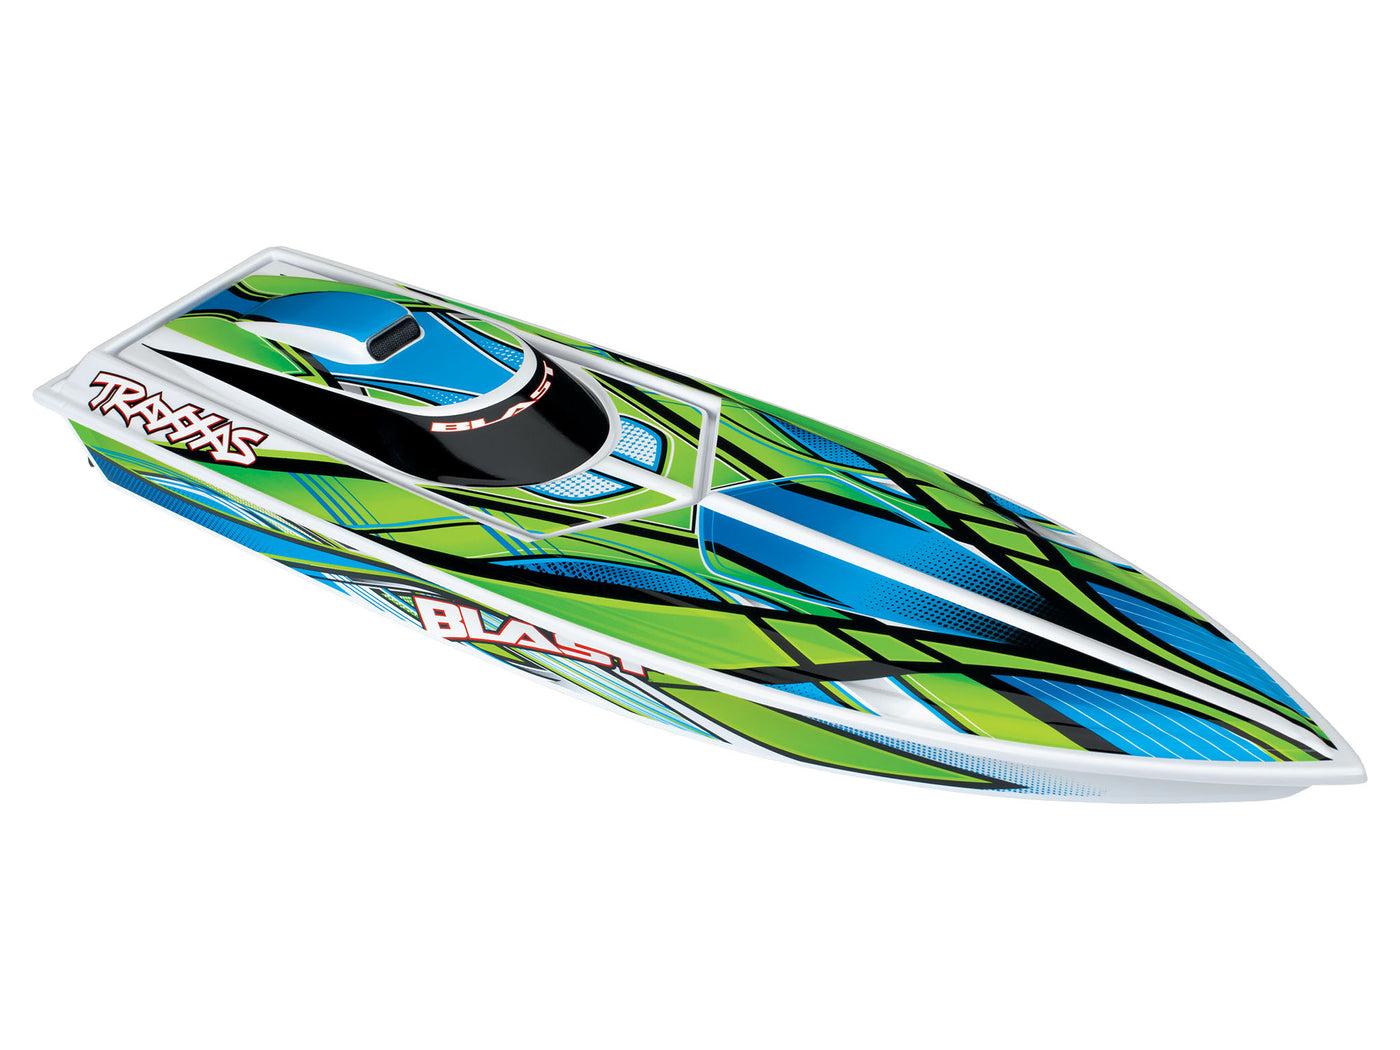 Traxxas 38104 1 Blast High Performance Race Boat Rtr: Traxxas 38104 1 Blast High Performance Race Boat RTR: The Ultimate Racing Experience